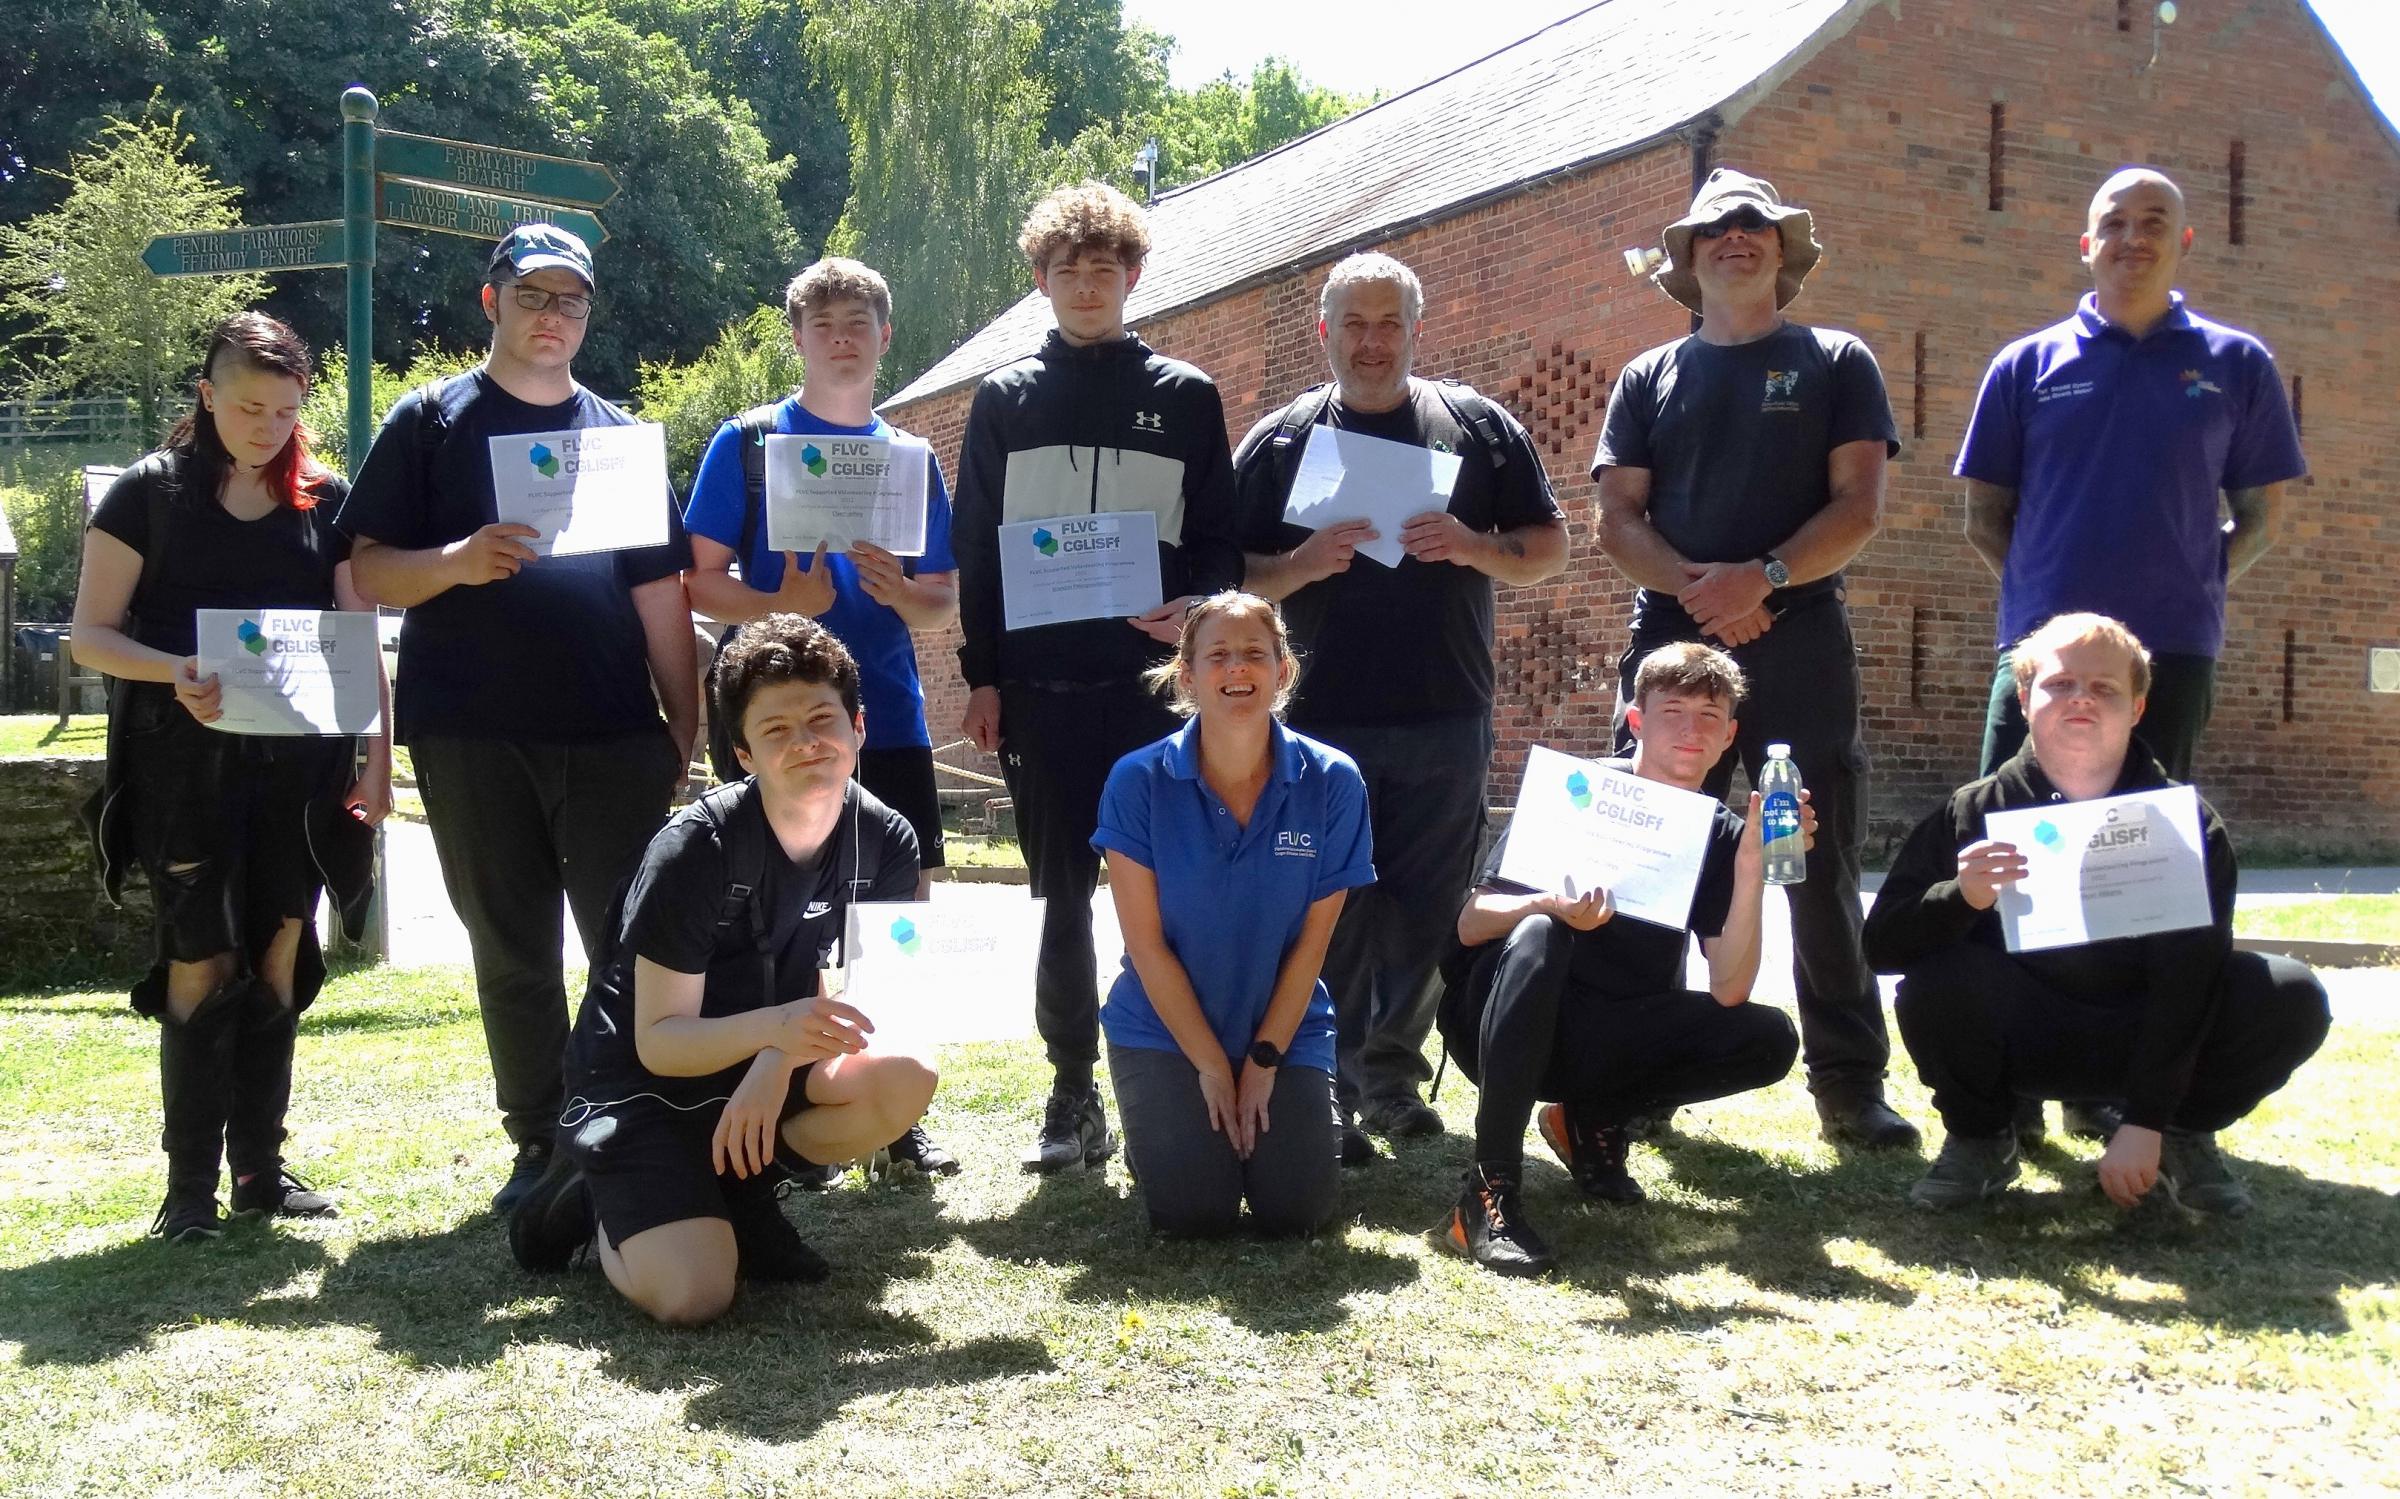 Jobs Growth Wales+ learners from Cambria spent six weeks at Greenfield Valley painting fences and benches, picking litter and carrying out a range of gardening, cleaning and landscaping tasks.